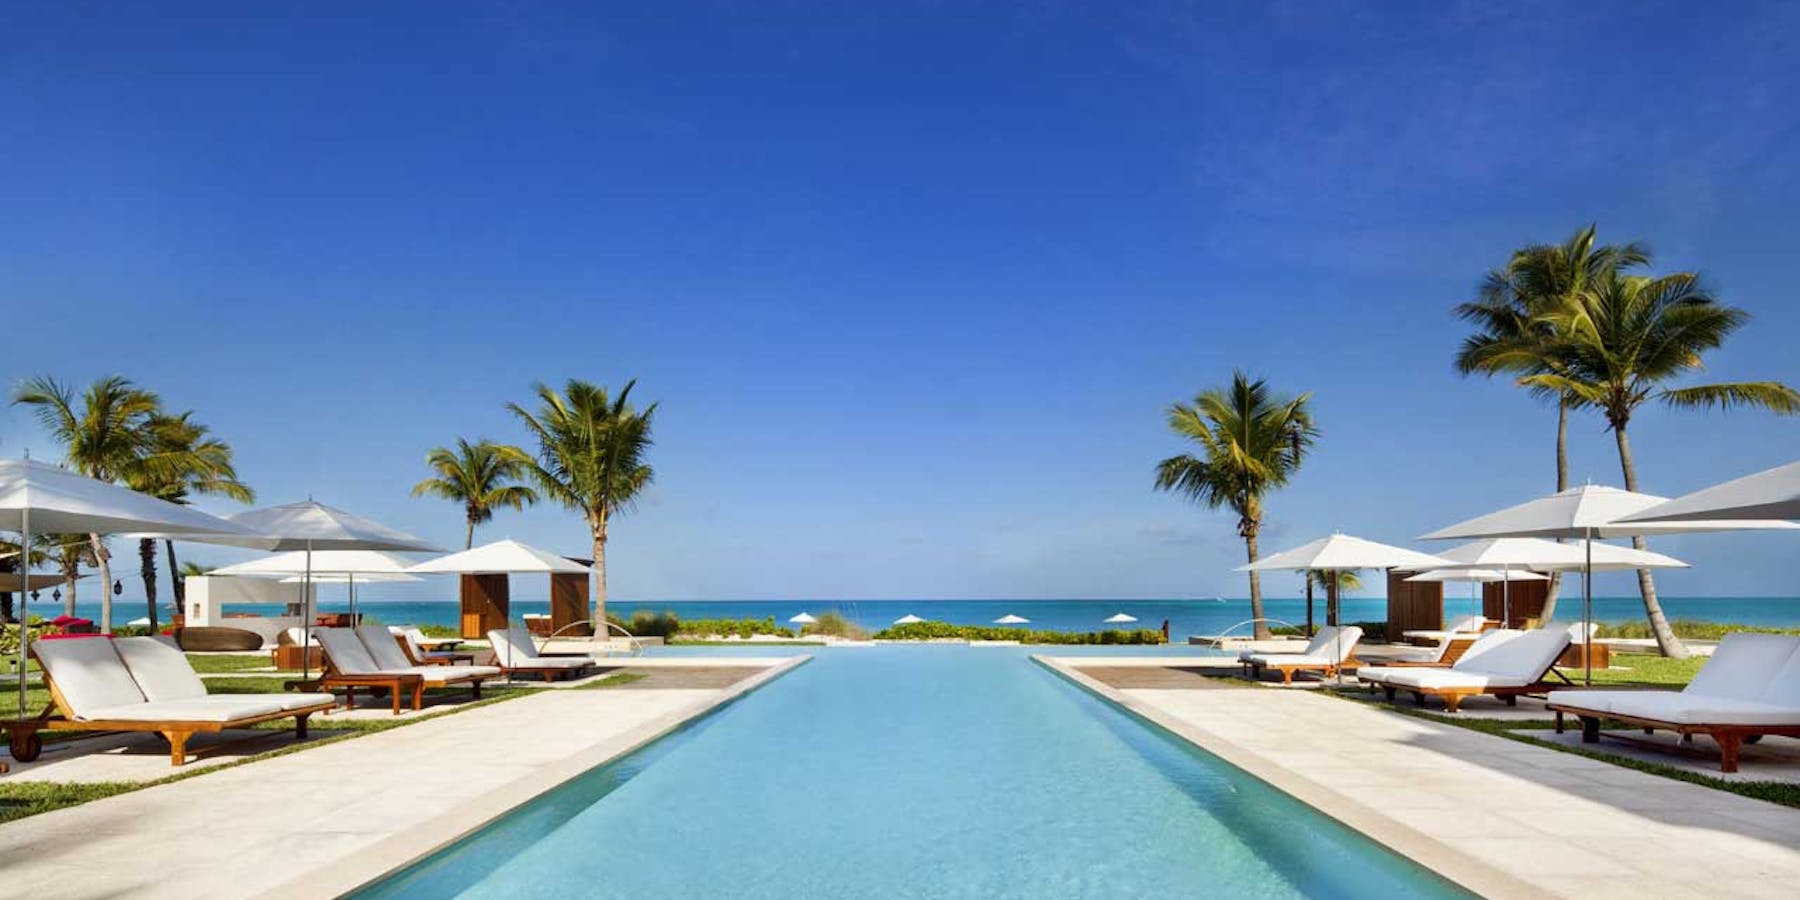 Best luxury hotels in Turks and Caicos